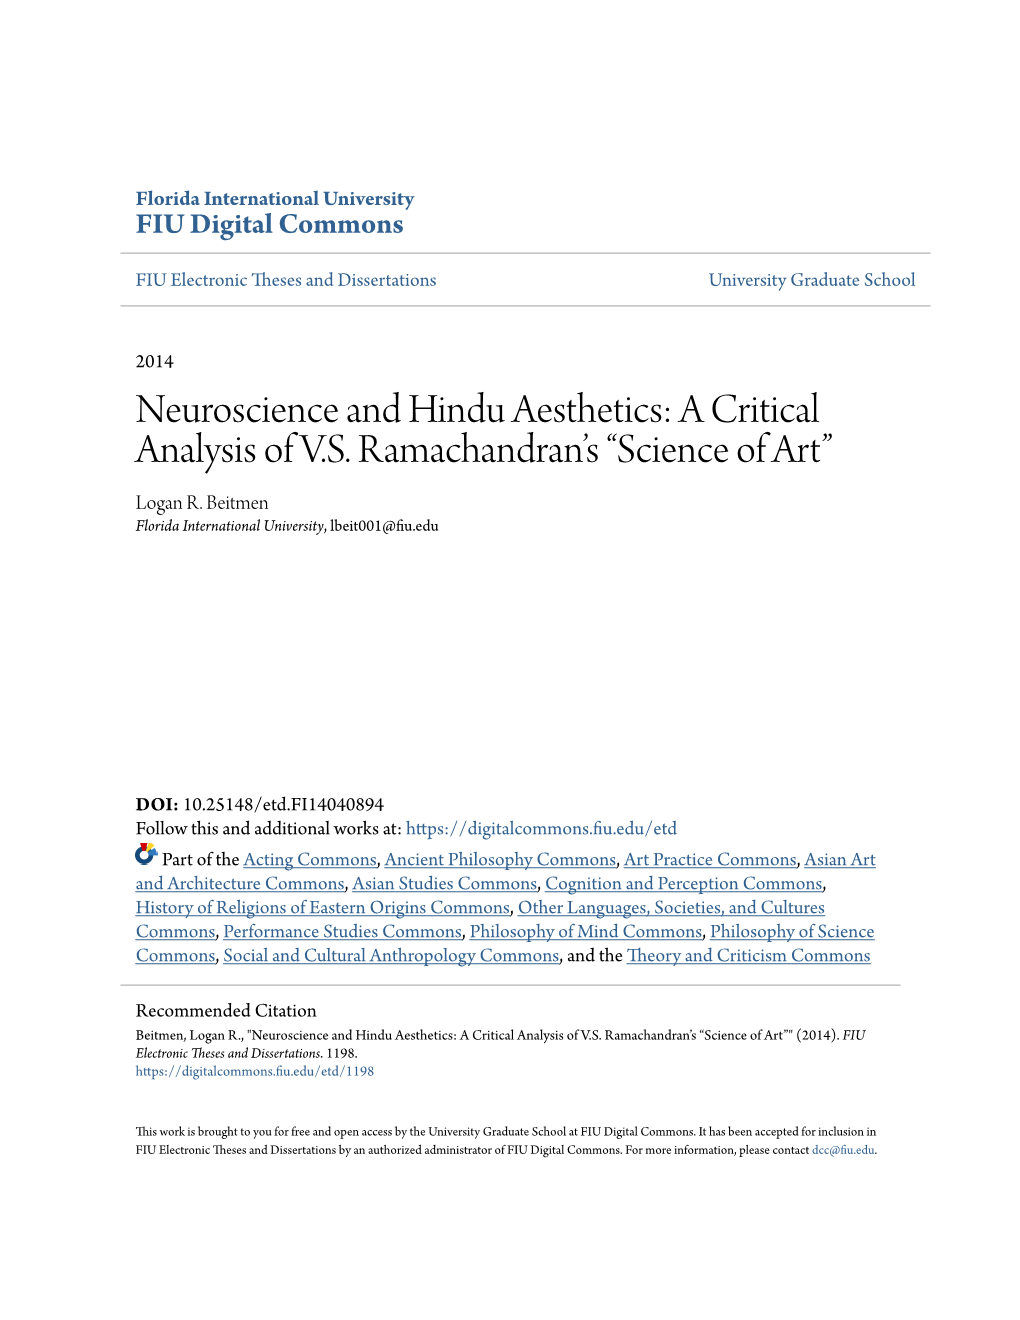 A Critical Analysis of VS Ramachandran's “Science of Art”